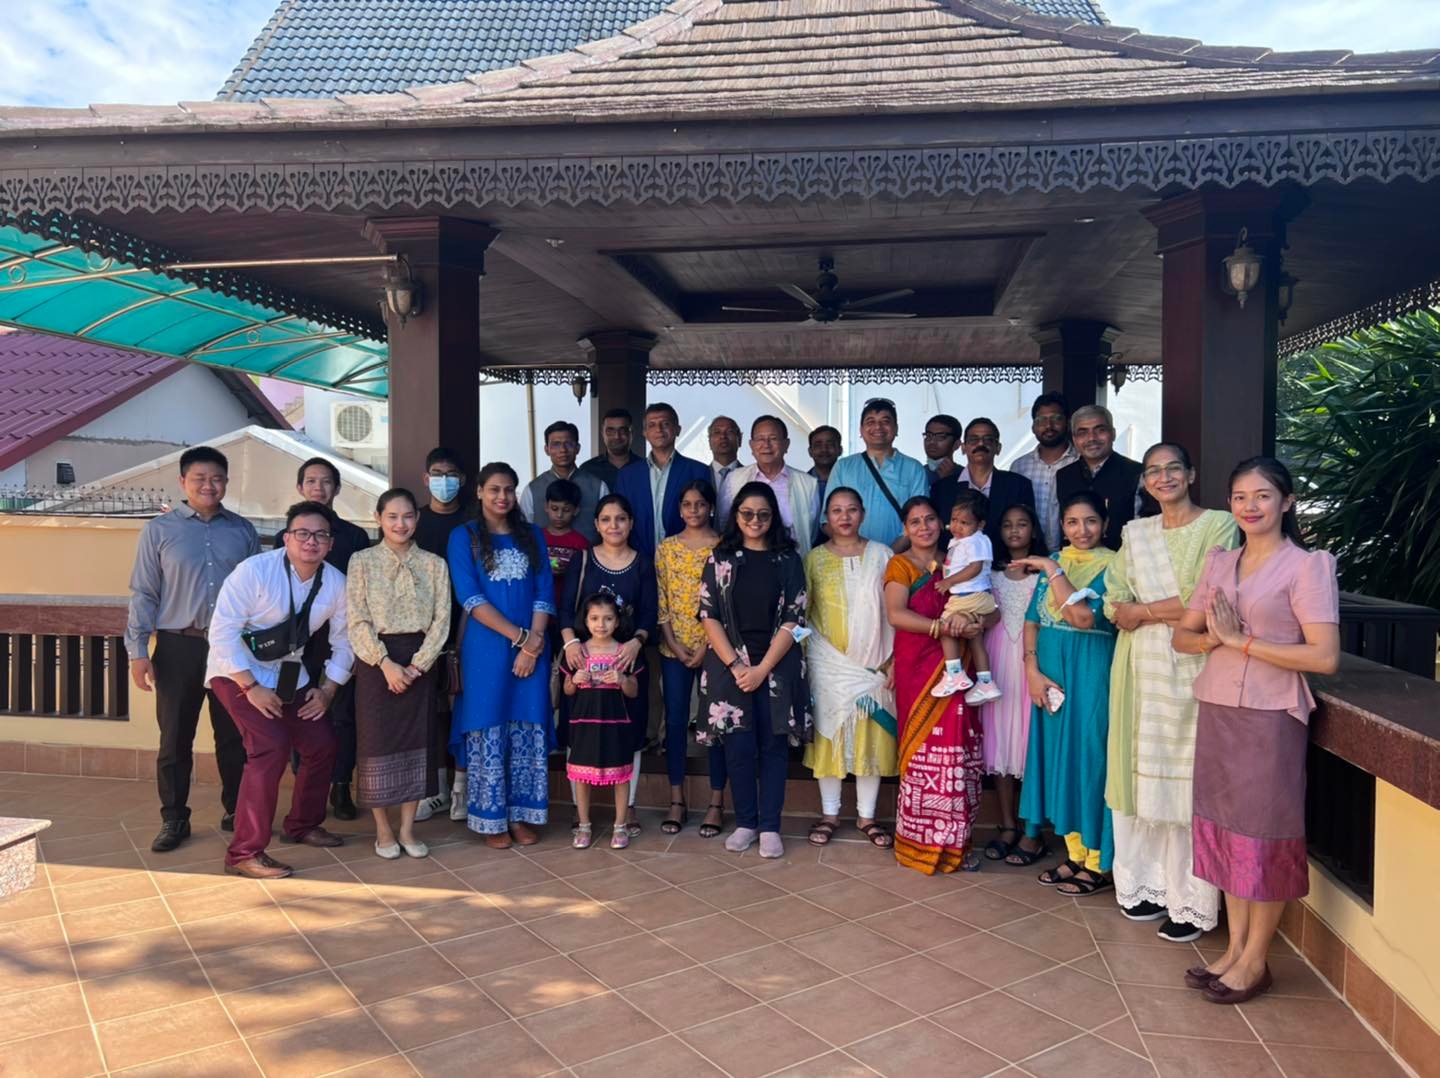 Dr. Rajkumar Ranjan Singh, MoS visited Indian Embassy in Vientiane Laos and interacted with Embassy members and their family